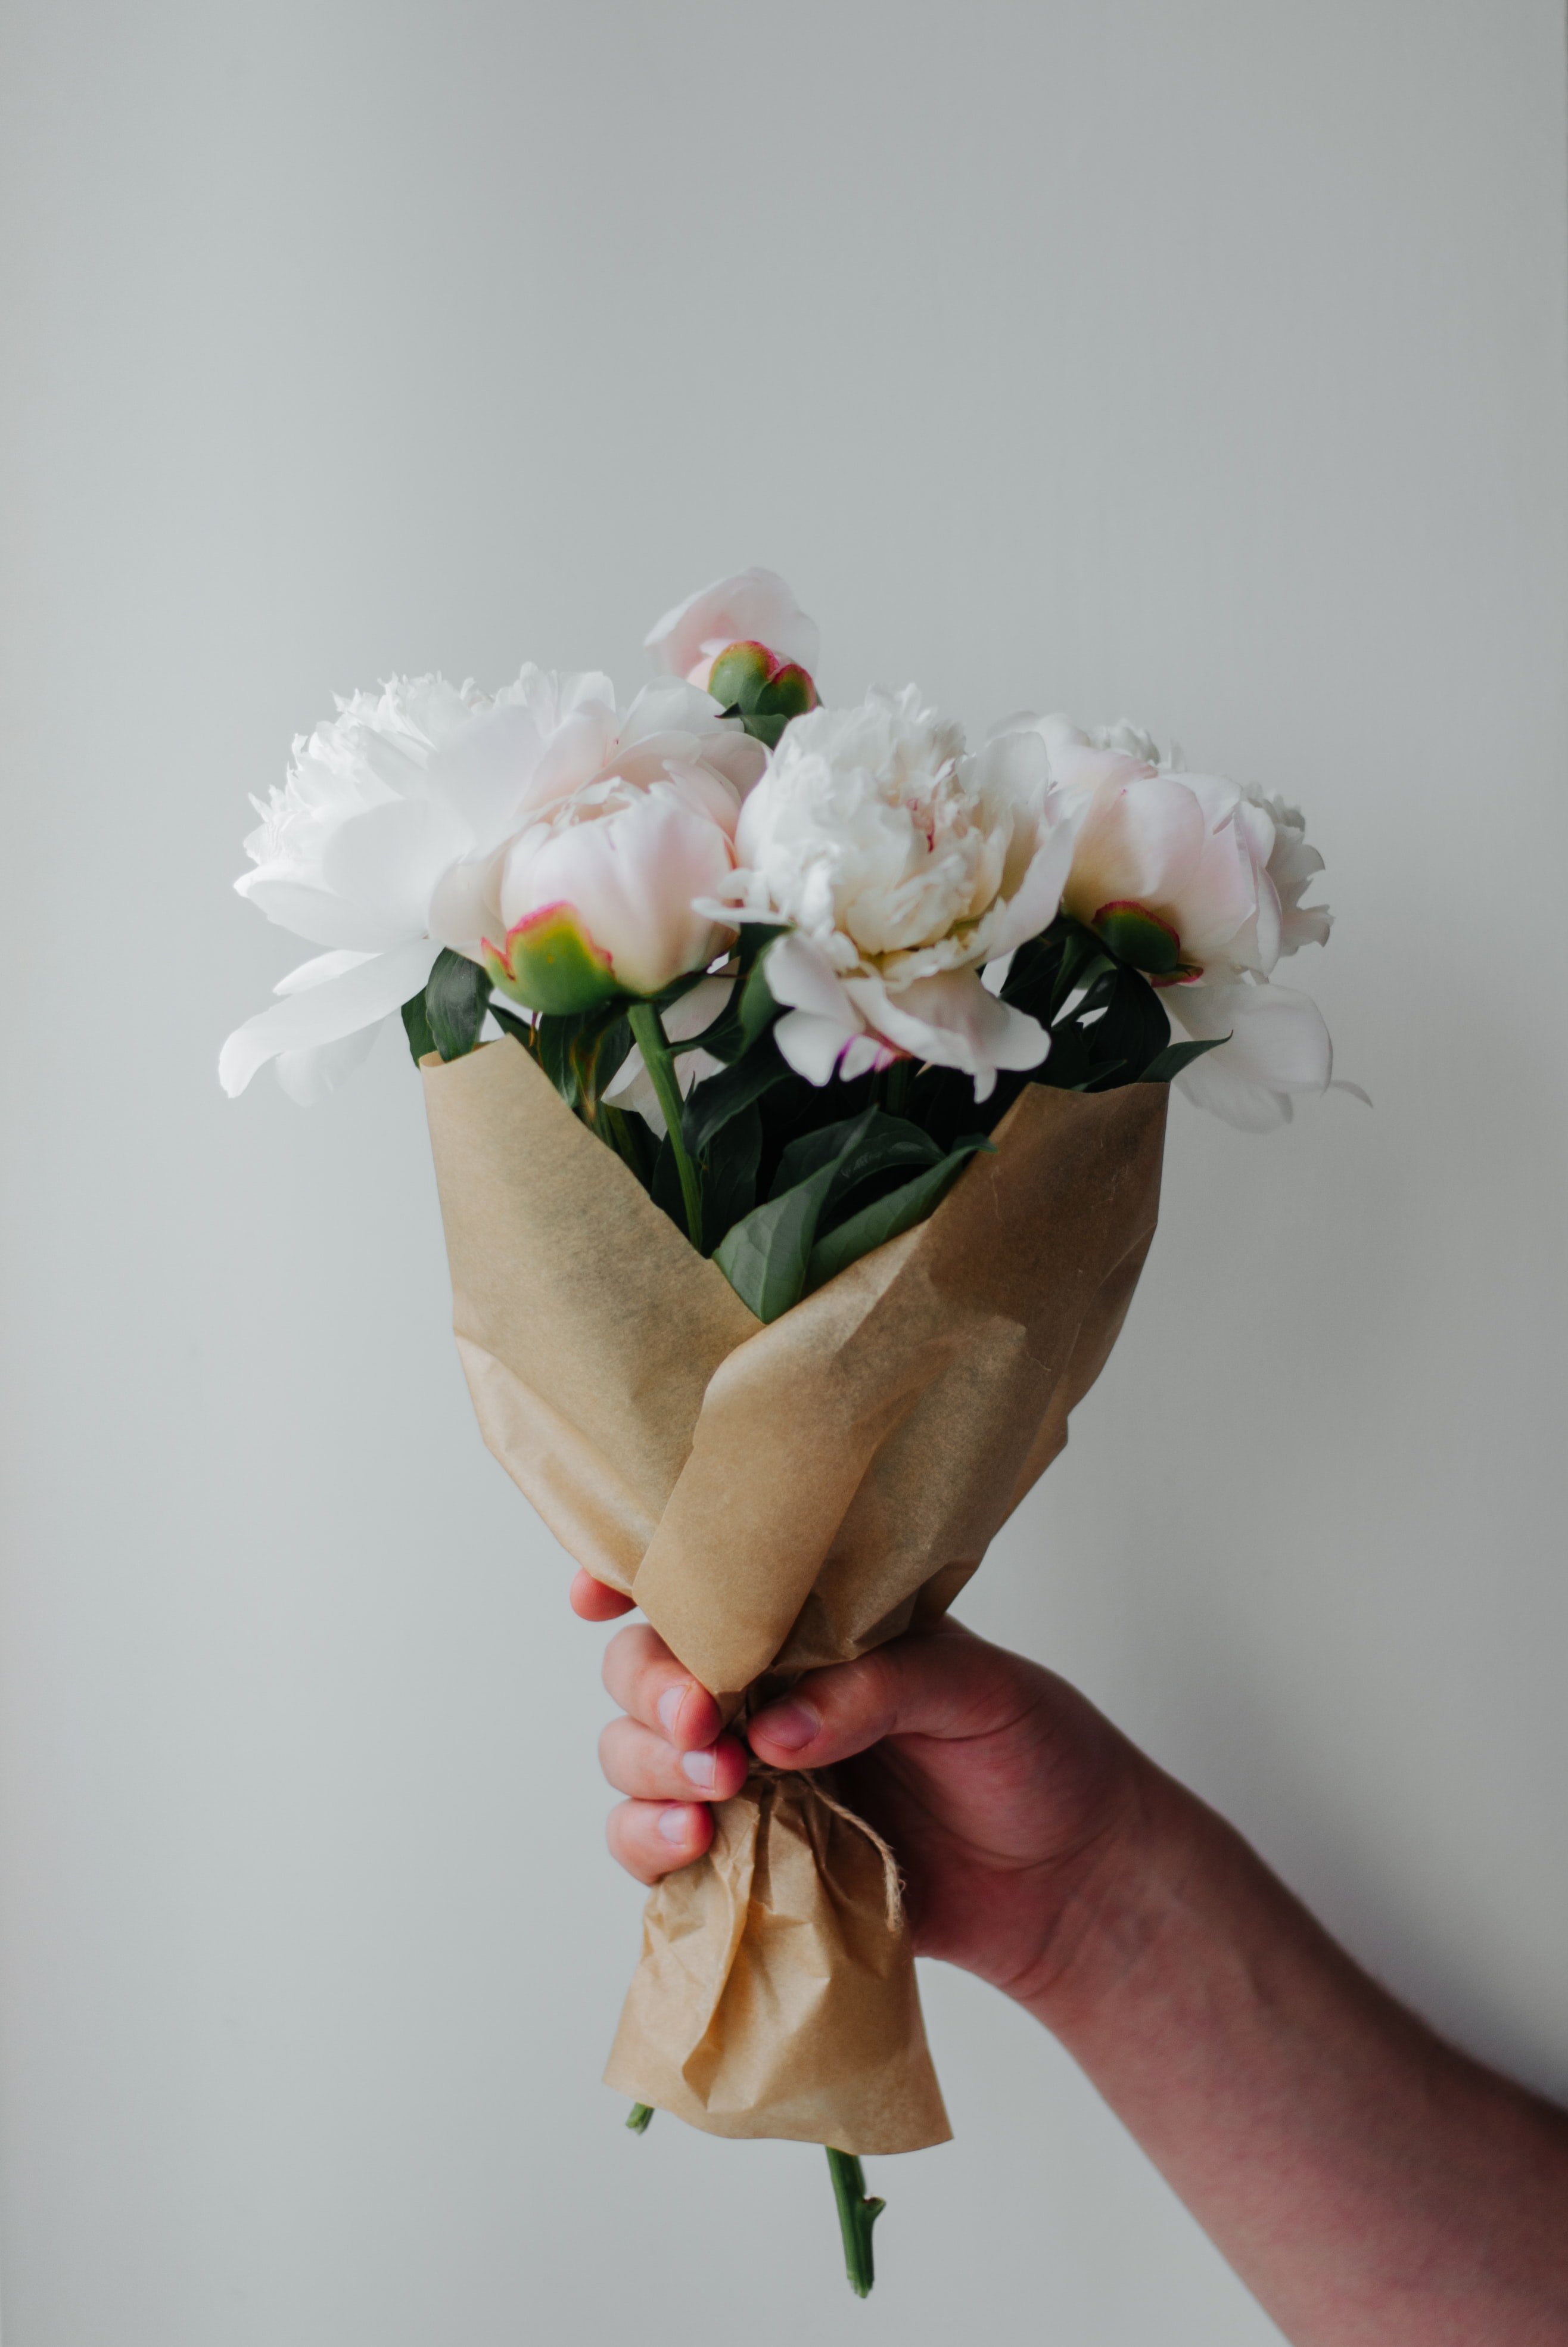 Every day, Hank gives away a bouquet of flowers in honor of his mysterious rescuer. | Source: Unsplash